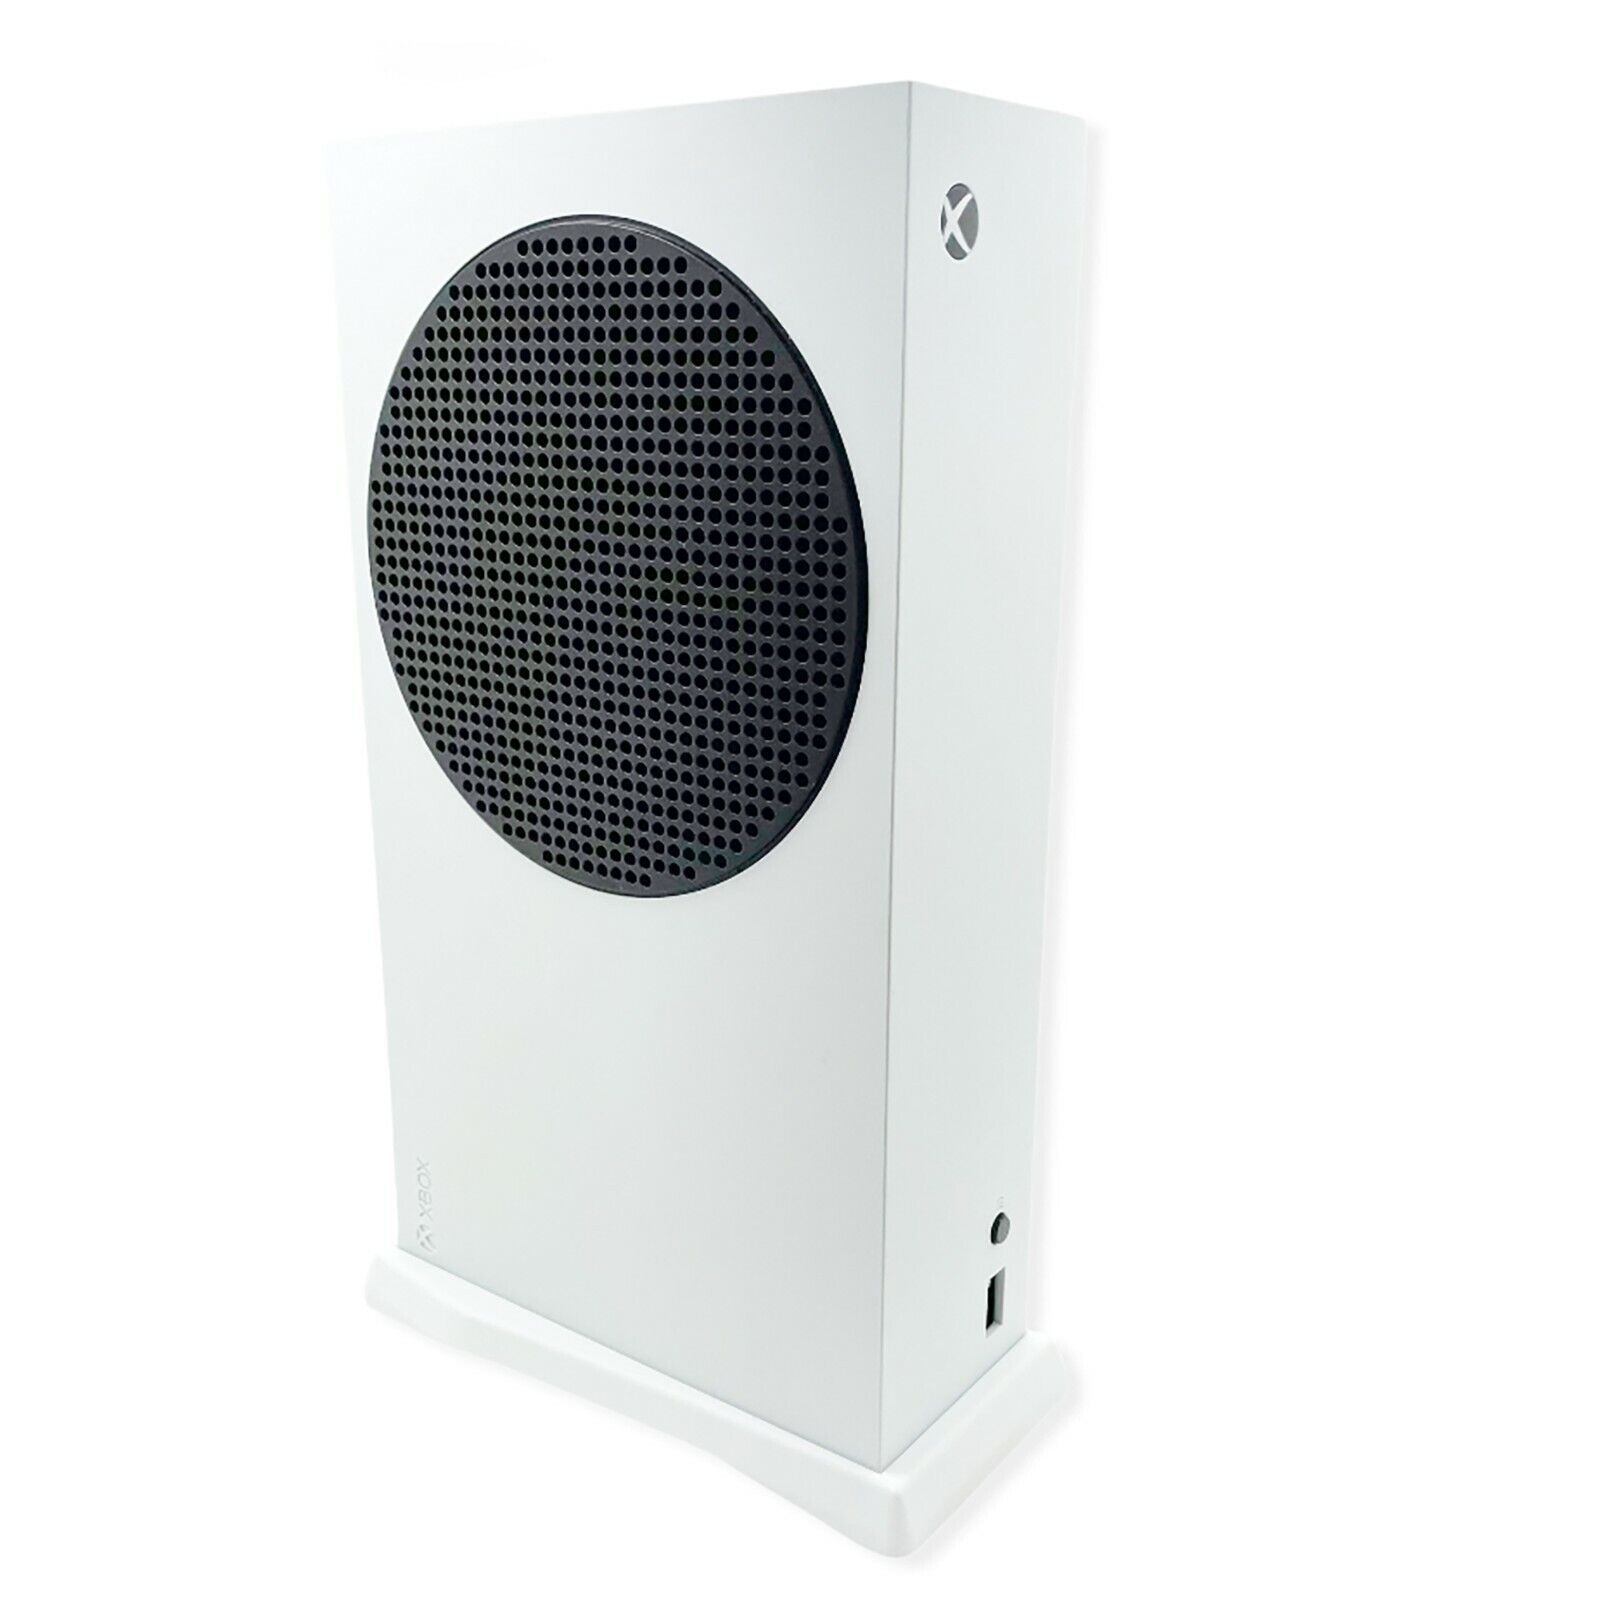 Xbox Series S Vertical Stand with Cooling Vents